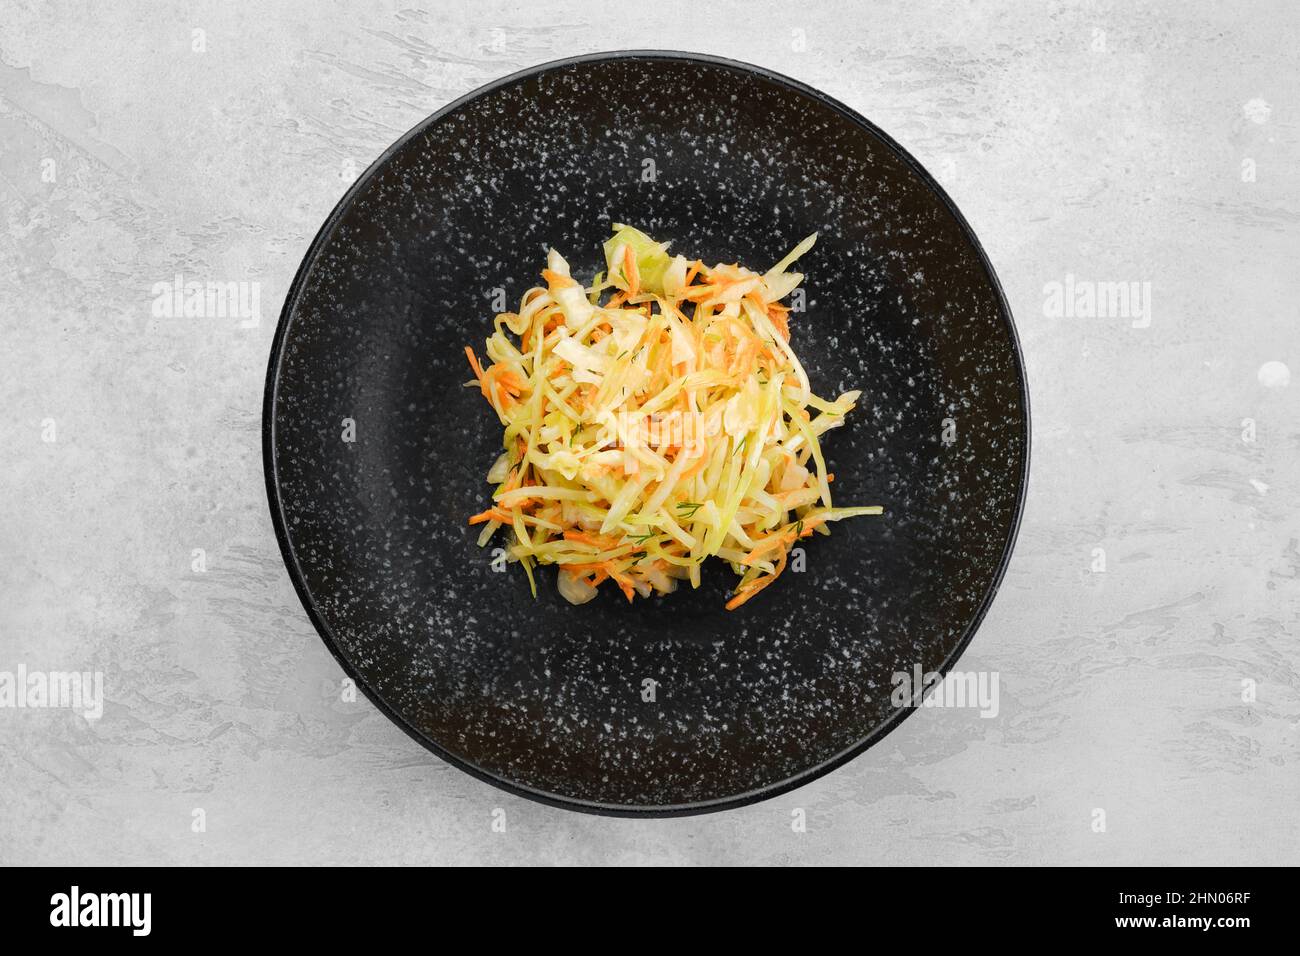 Pickled slices of cabbage and carrot on a plate, top view Stock Photo